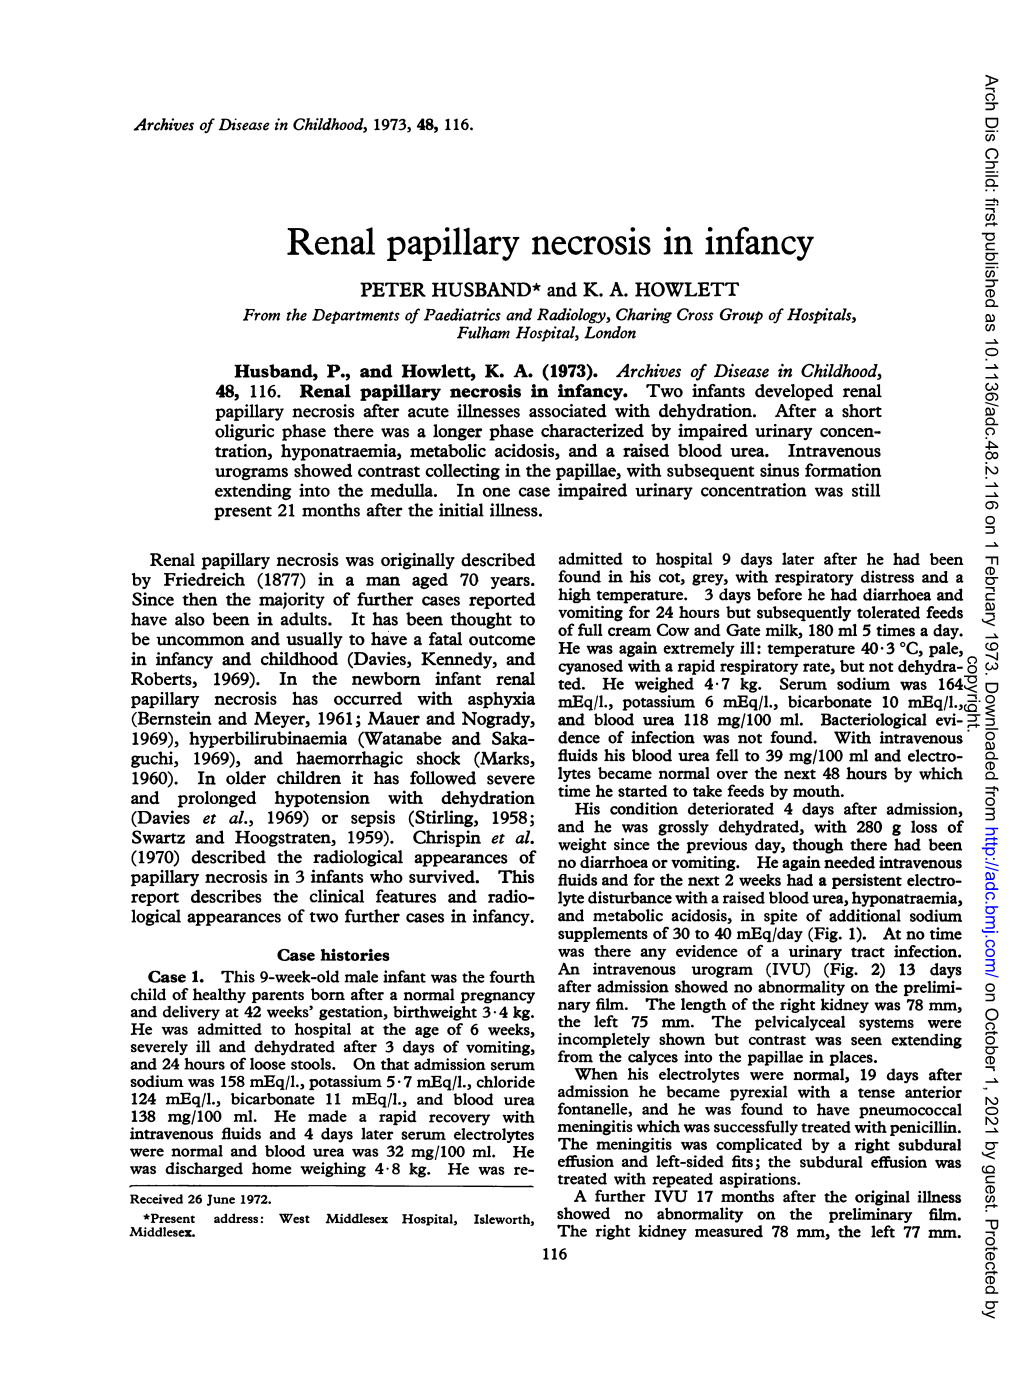 Renal Papillary Necrosis in Infancy PETER HUSBAND* and K